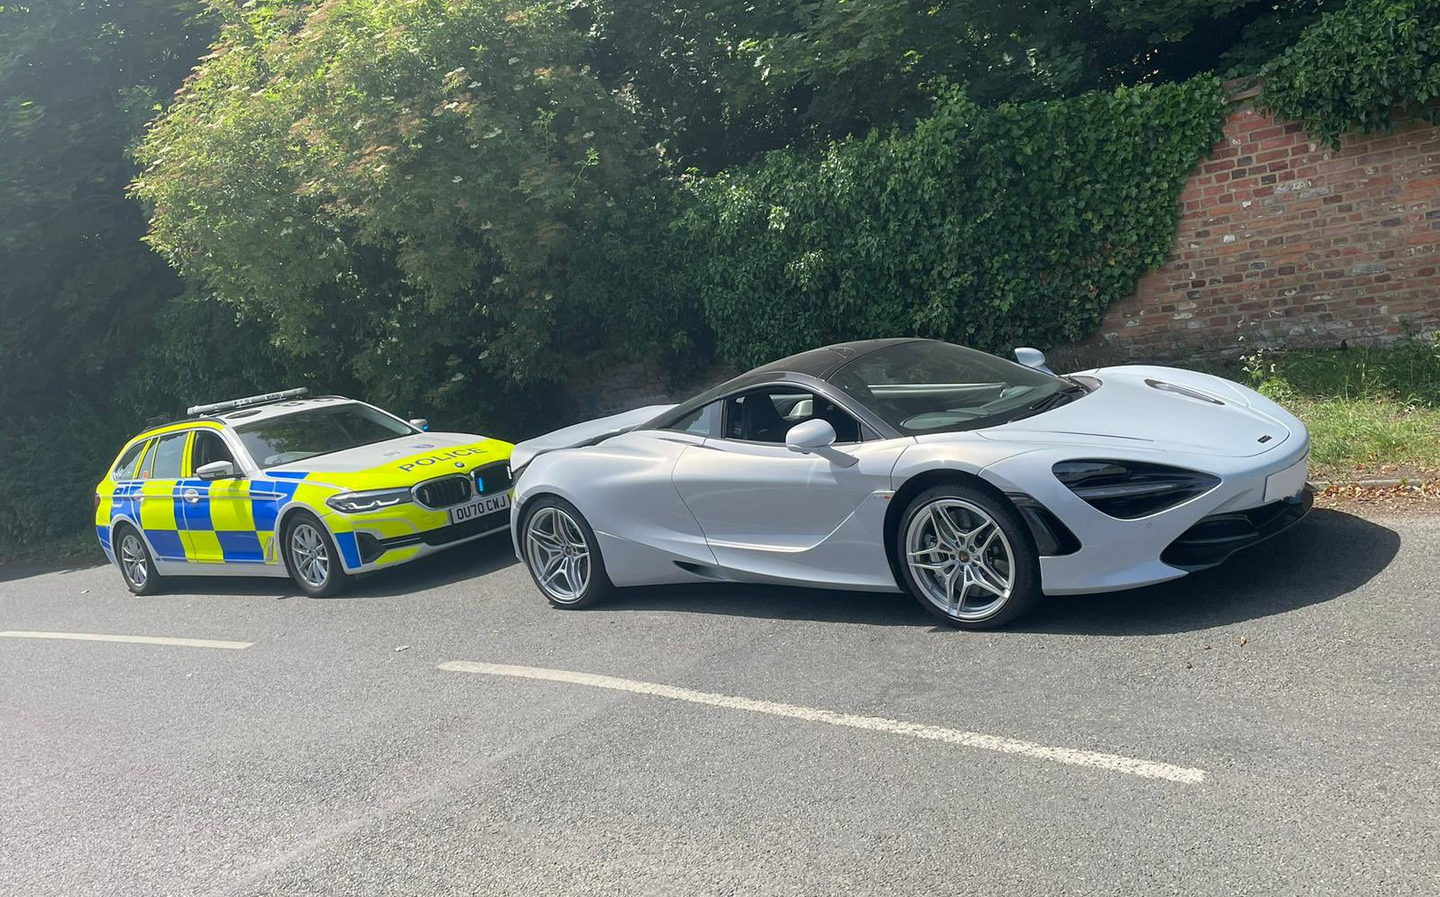 Thames Valley Police seize McLaren 720S for no insurance